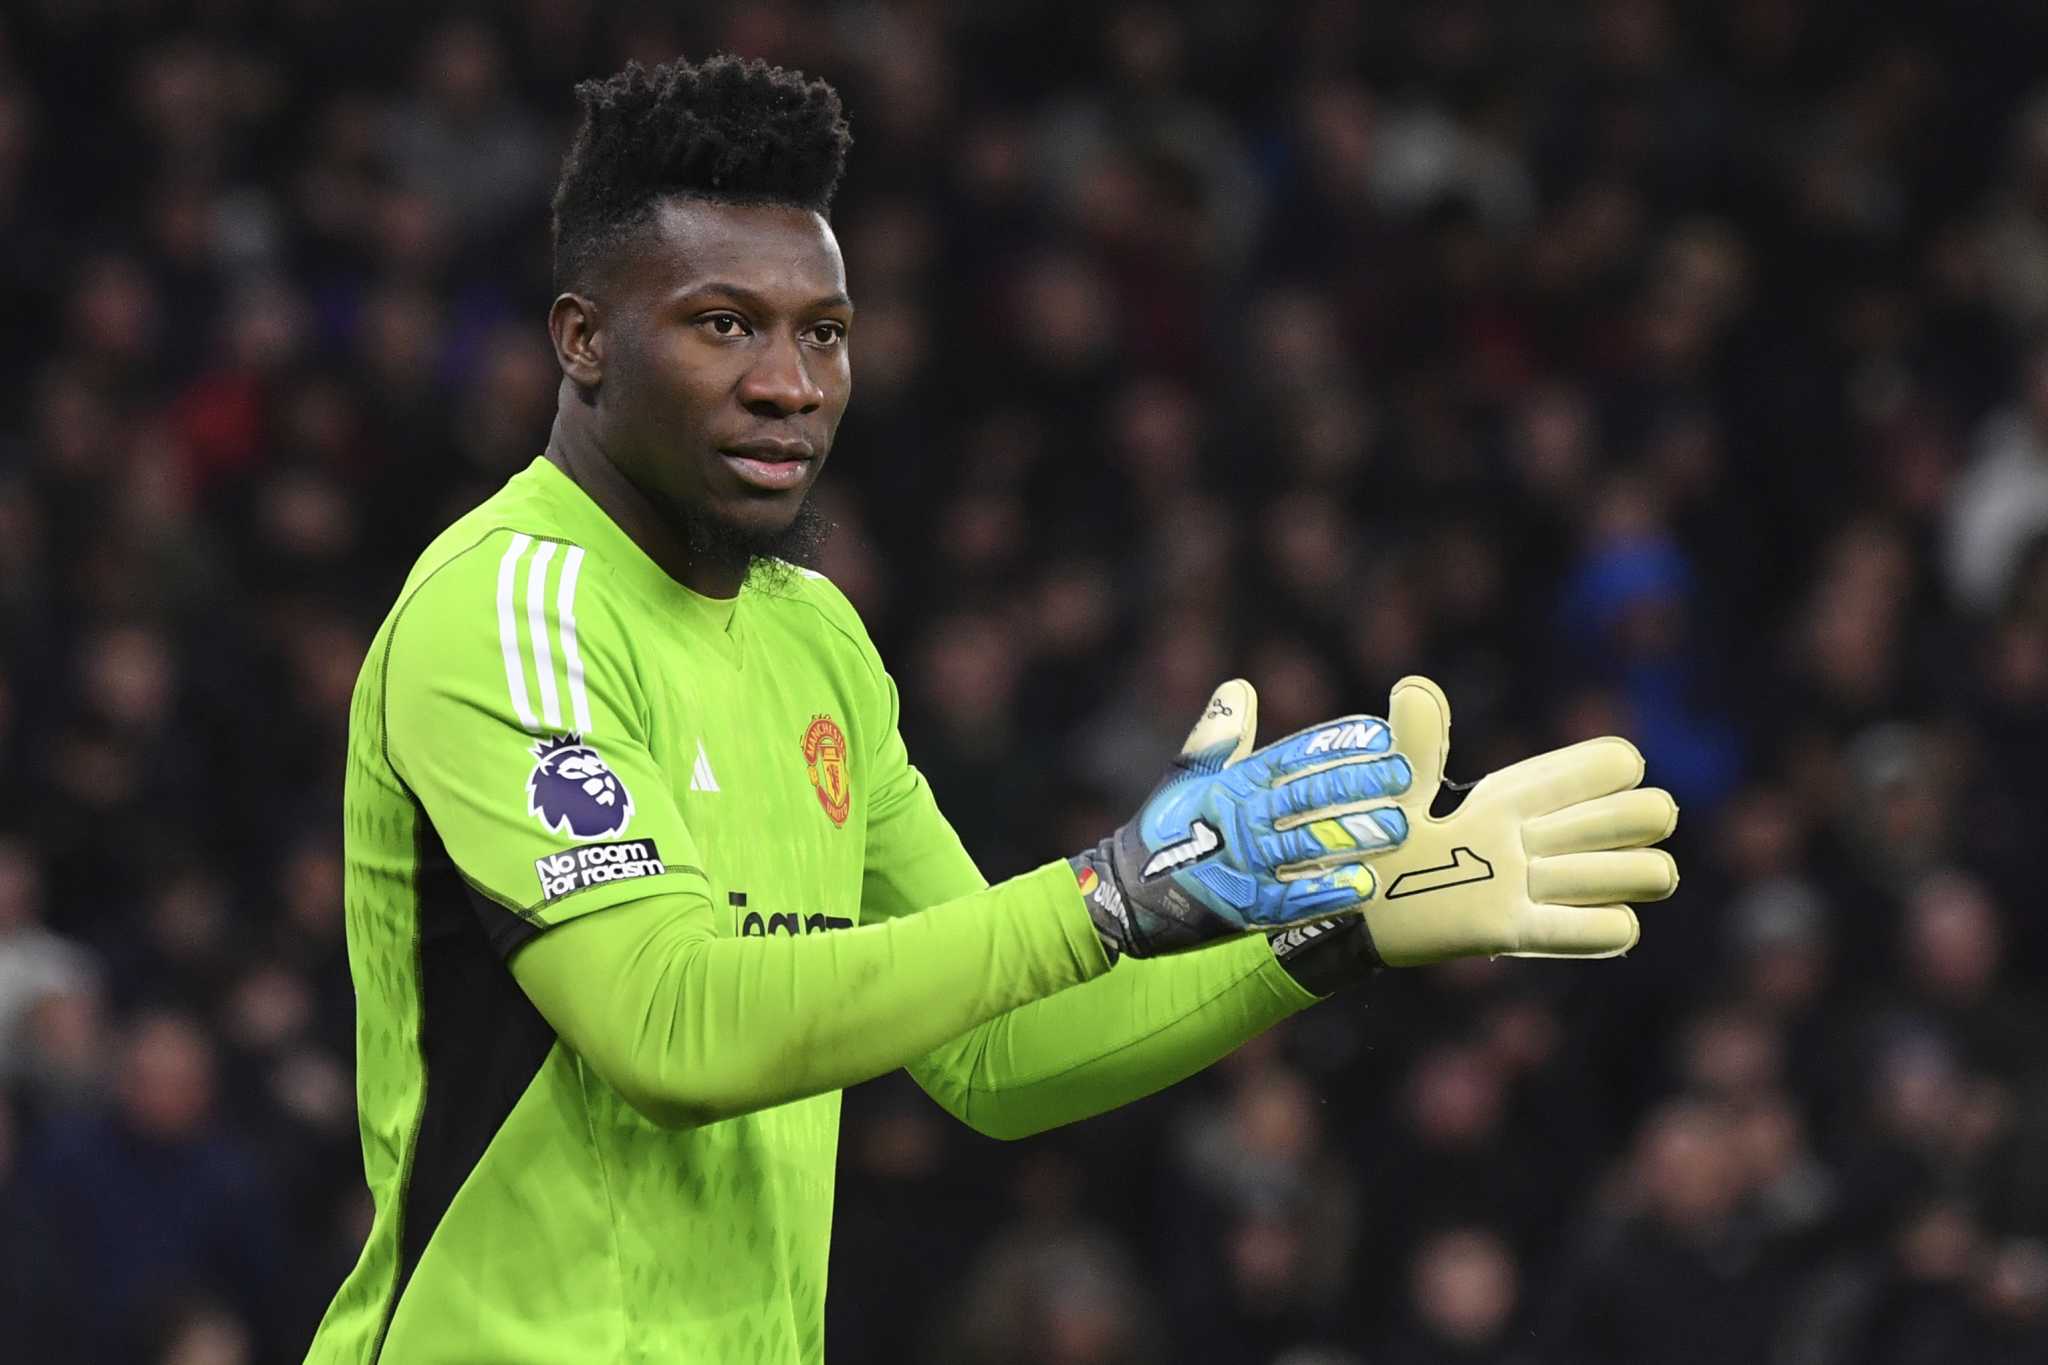 Man United goalkeeper Andre Onana had to protect his mental health after poor start at the club